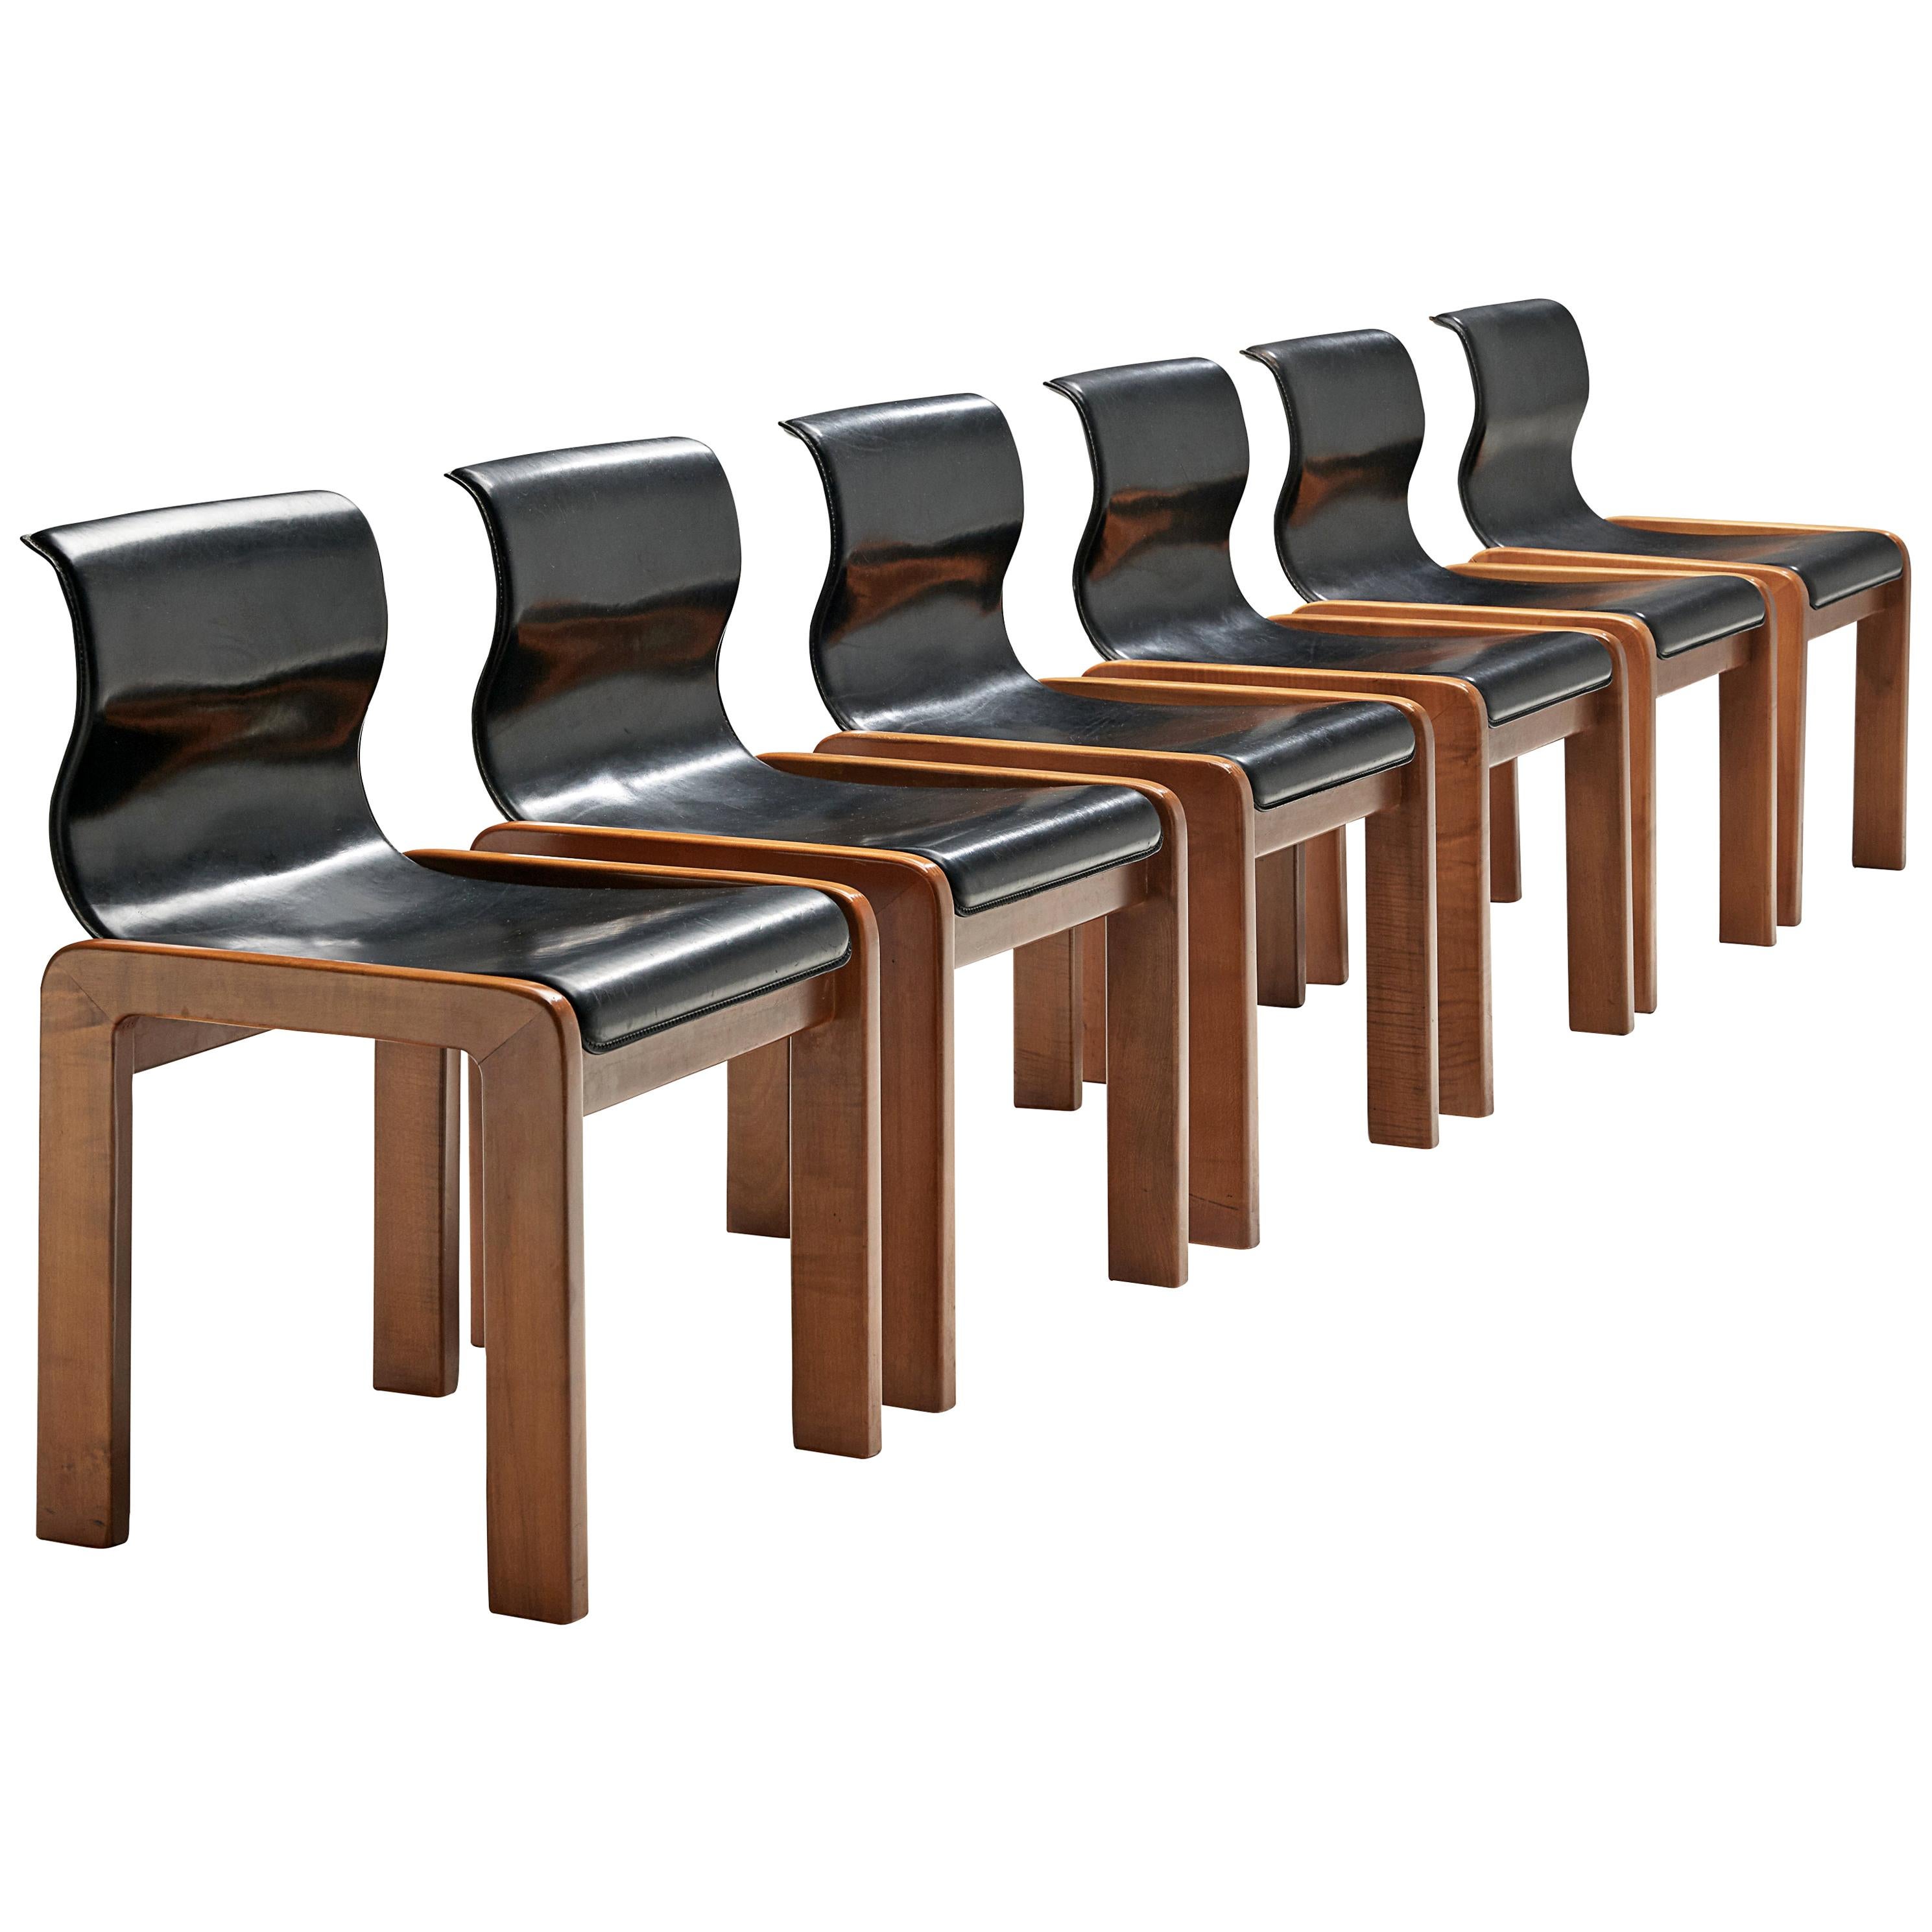 Set of Six Italian Dining Chairs in Walnut and Black Leather Seats